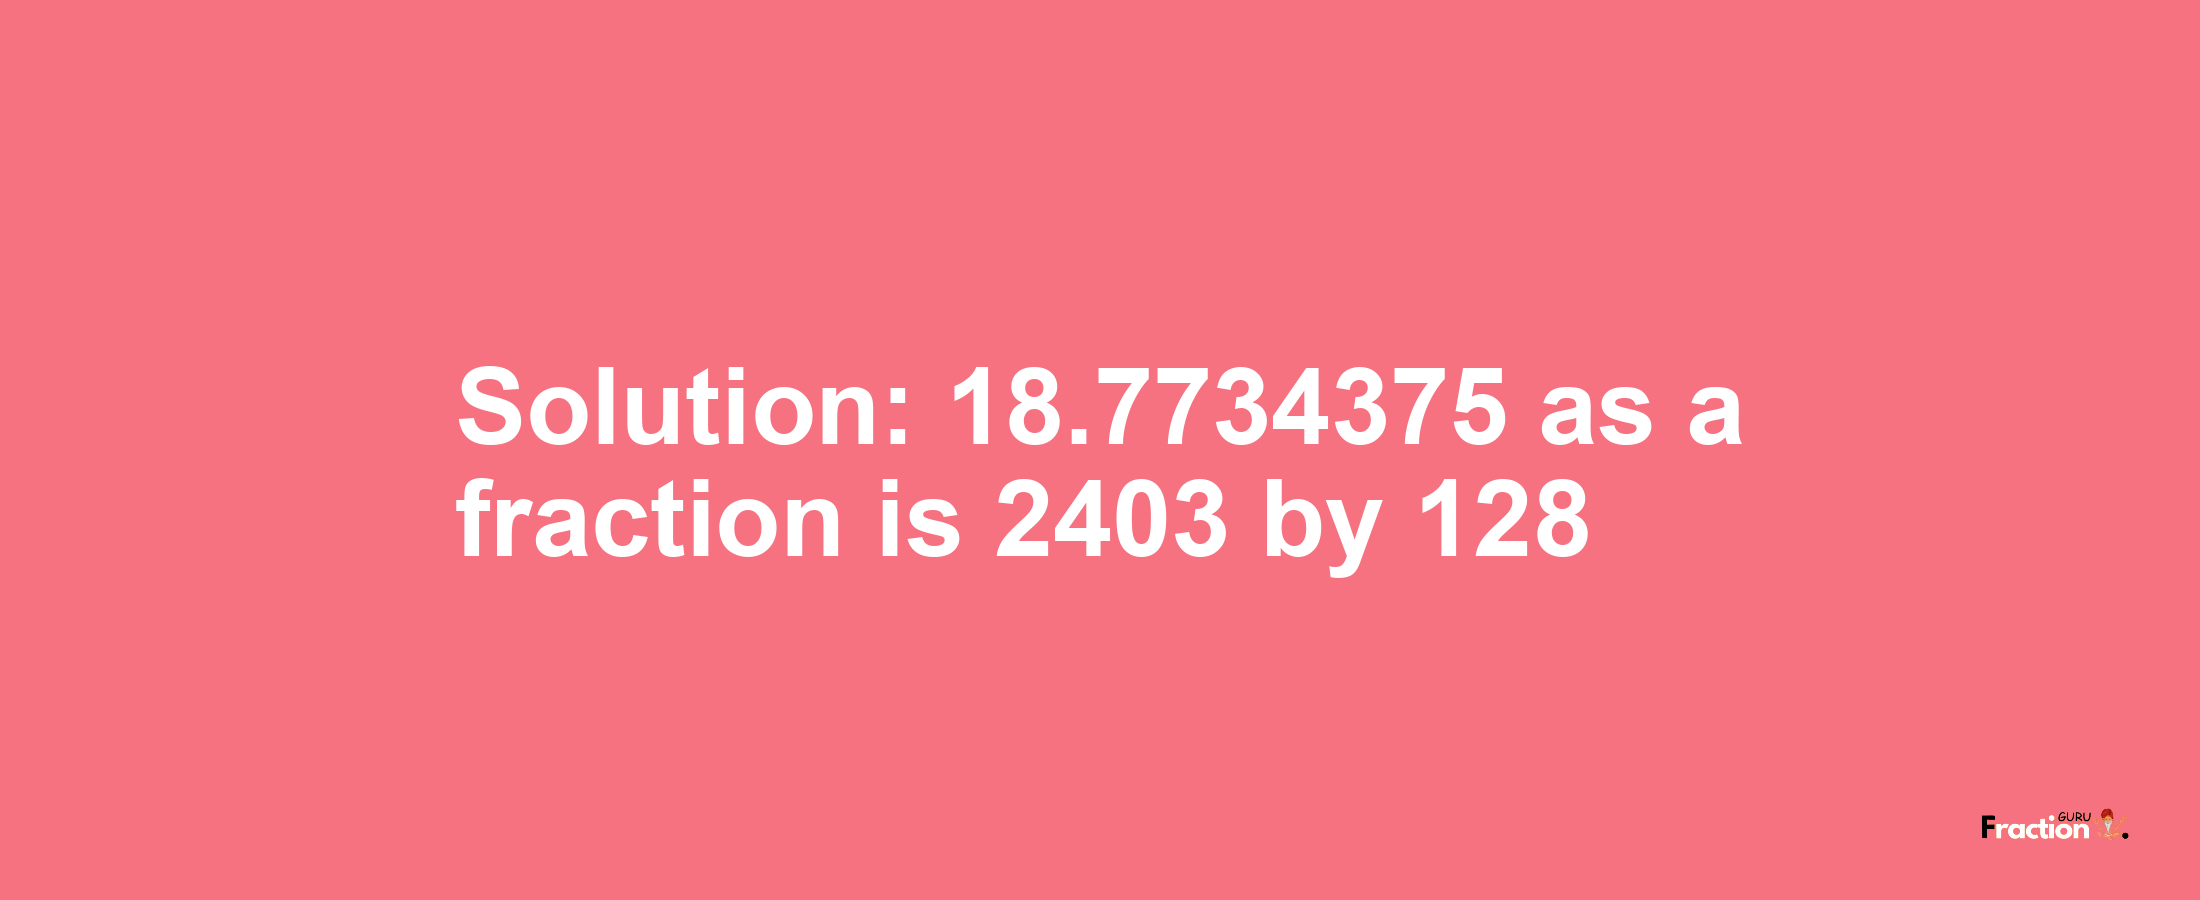 Solution:18.7734375 as a fraction is 2403/128